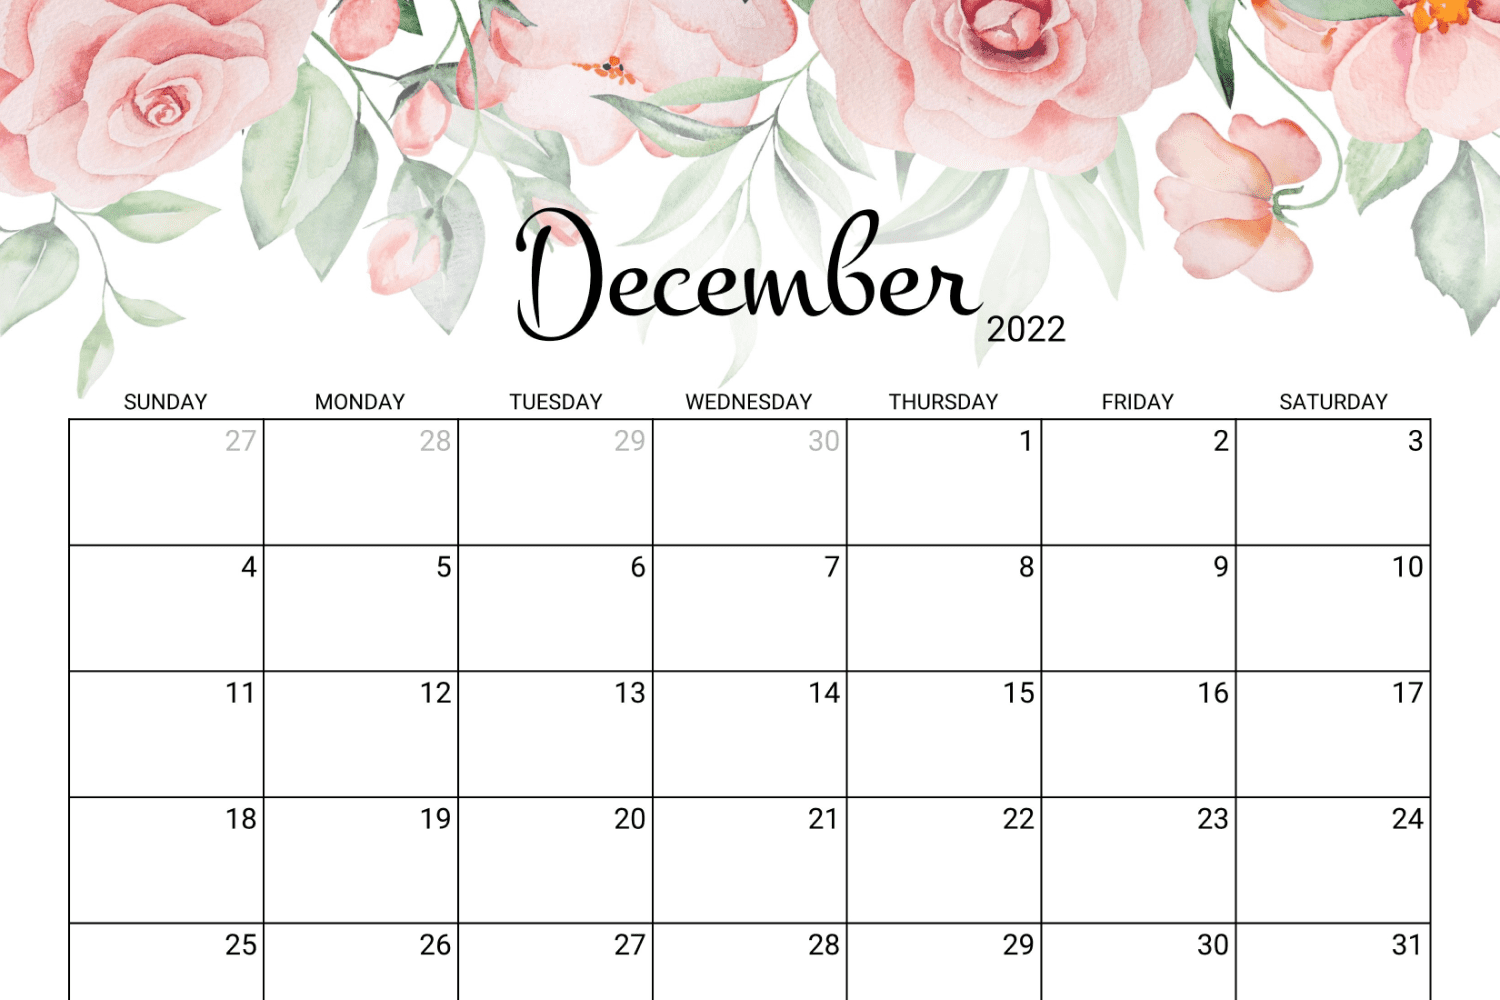 December calendar with roses at the top and holidays at the bottom.